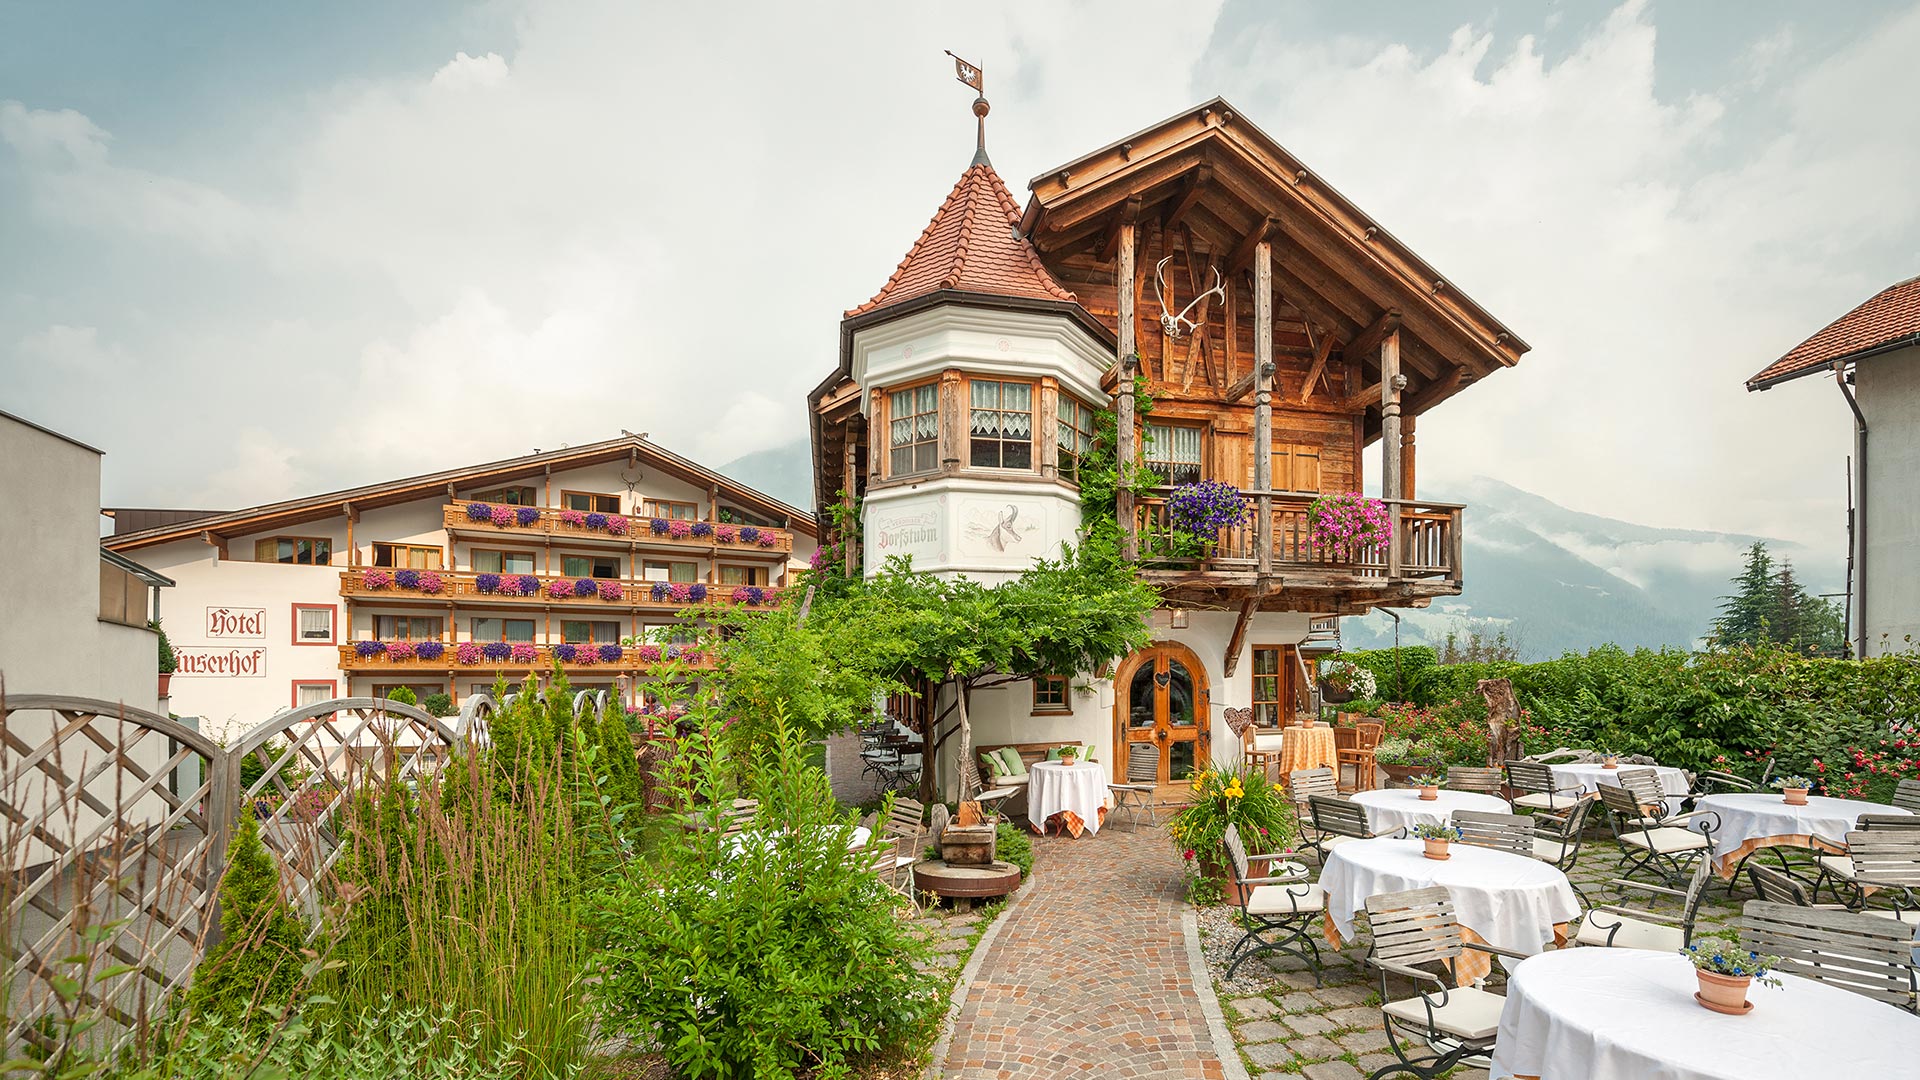 The philosophy of the 4-star Verdinser Hof Hotel S in Schenna is to make you feel at home during your stay.